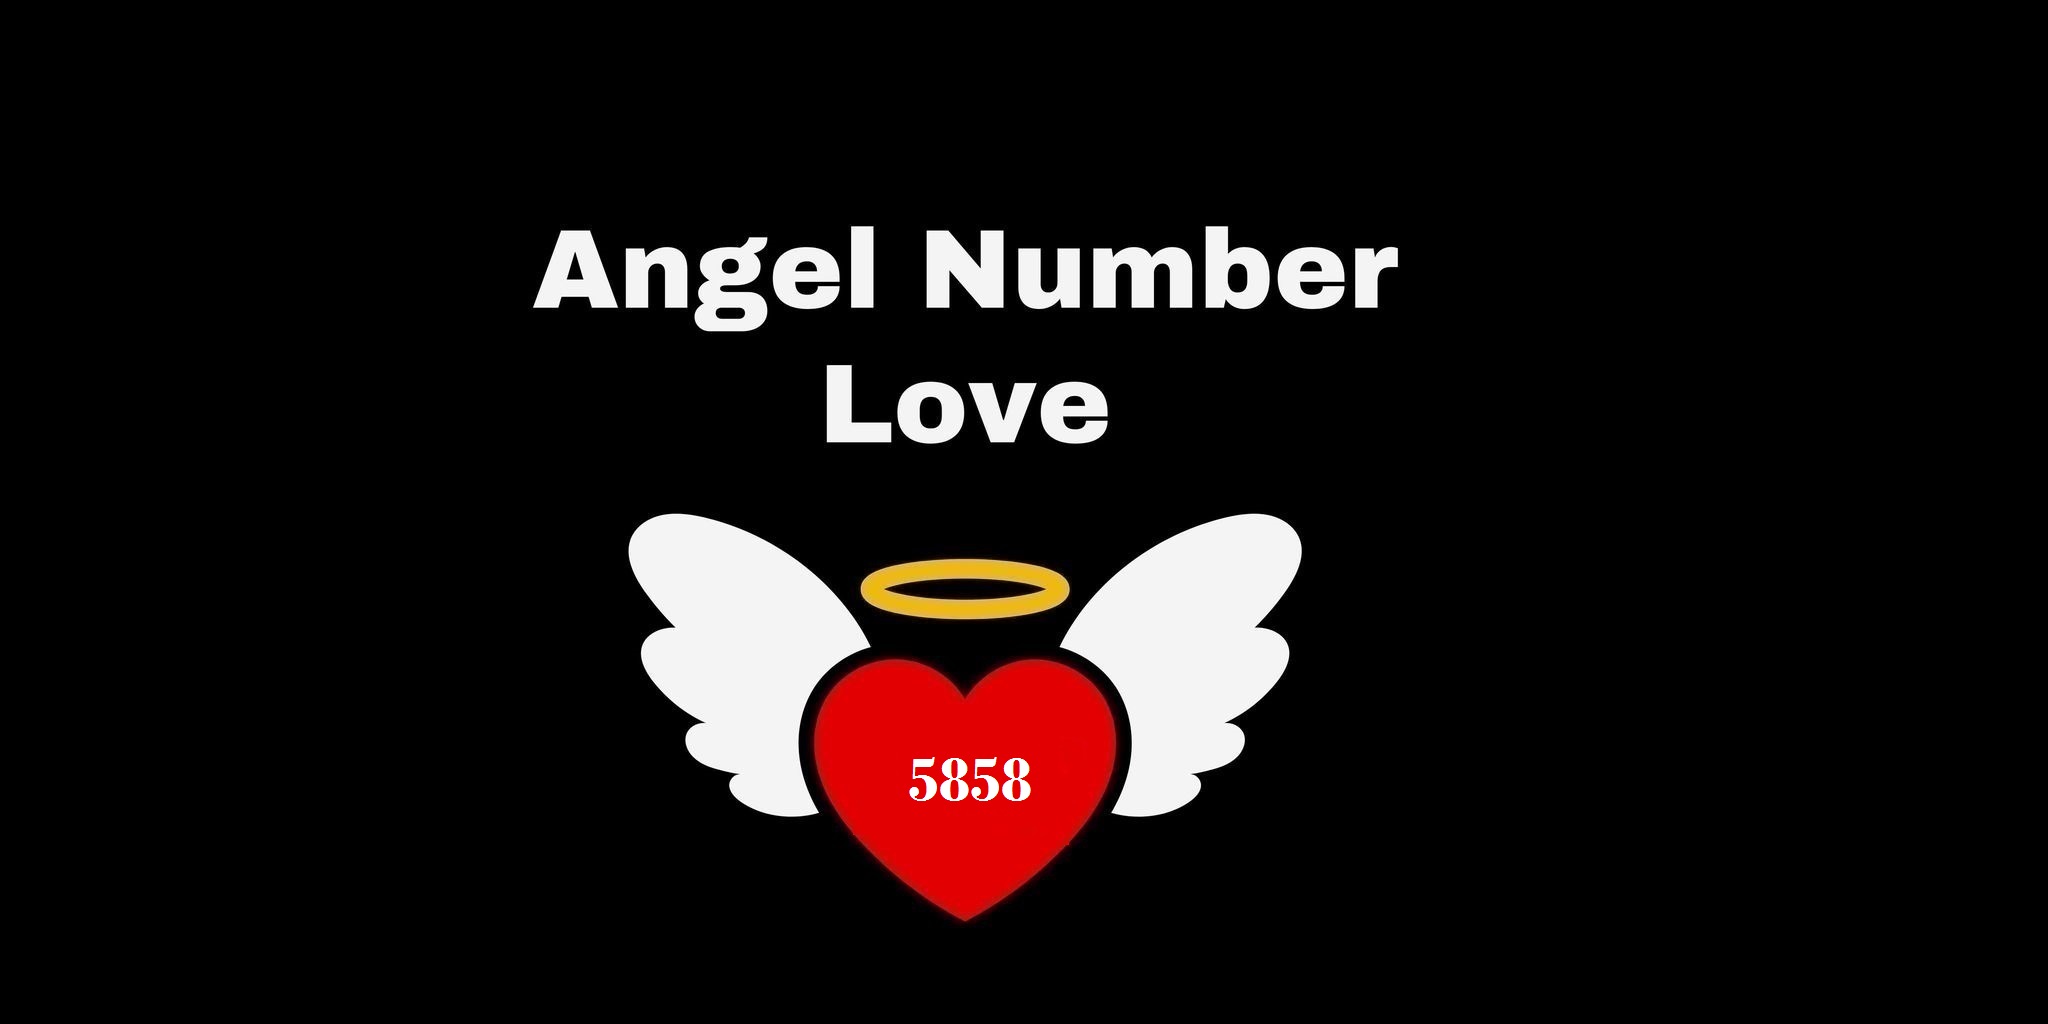 5858 Angel Number Meaning In Love